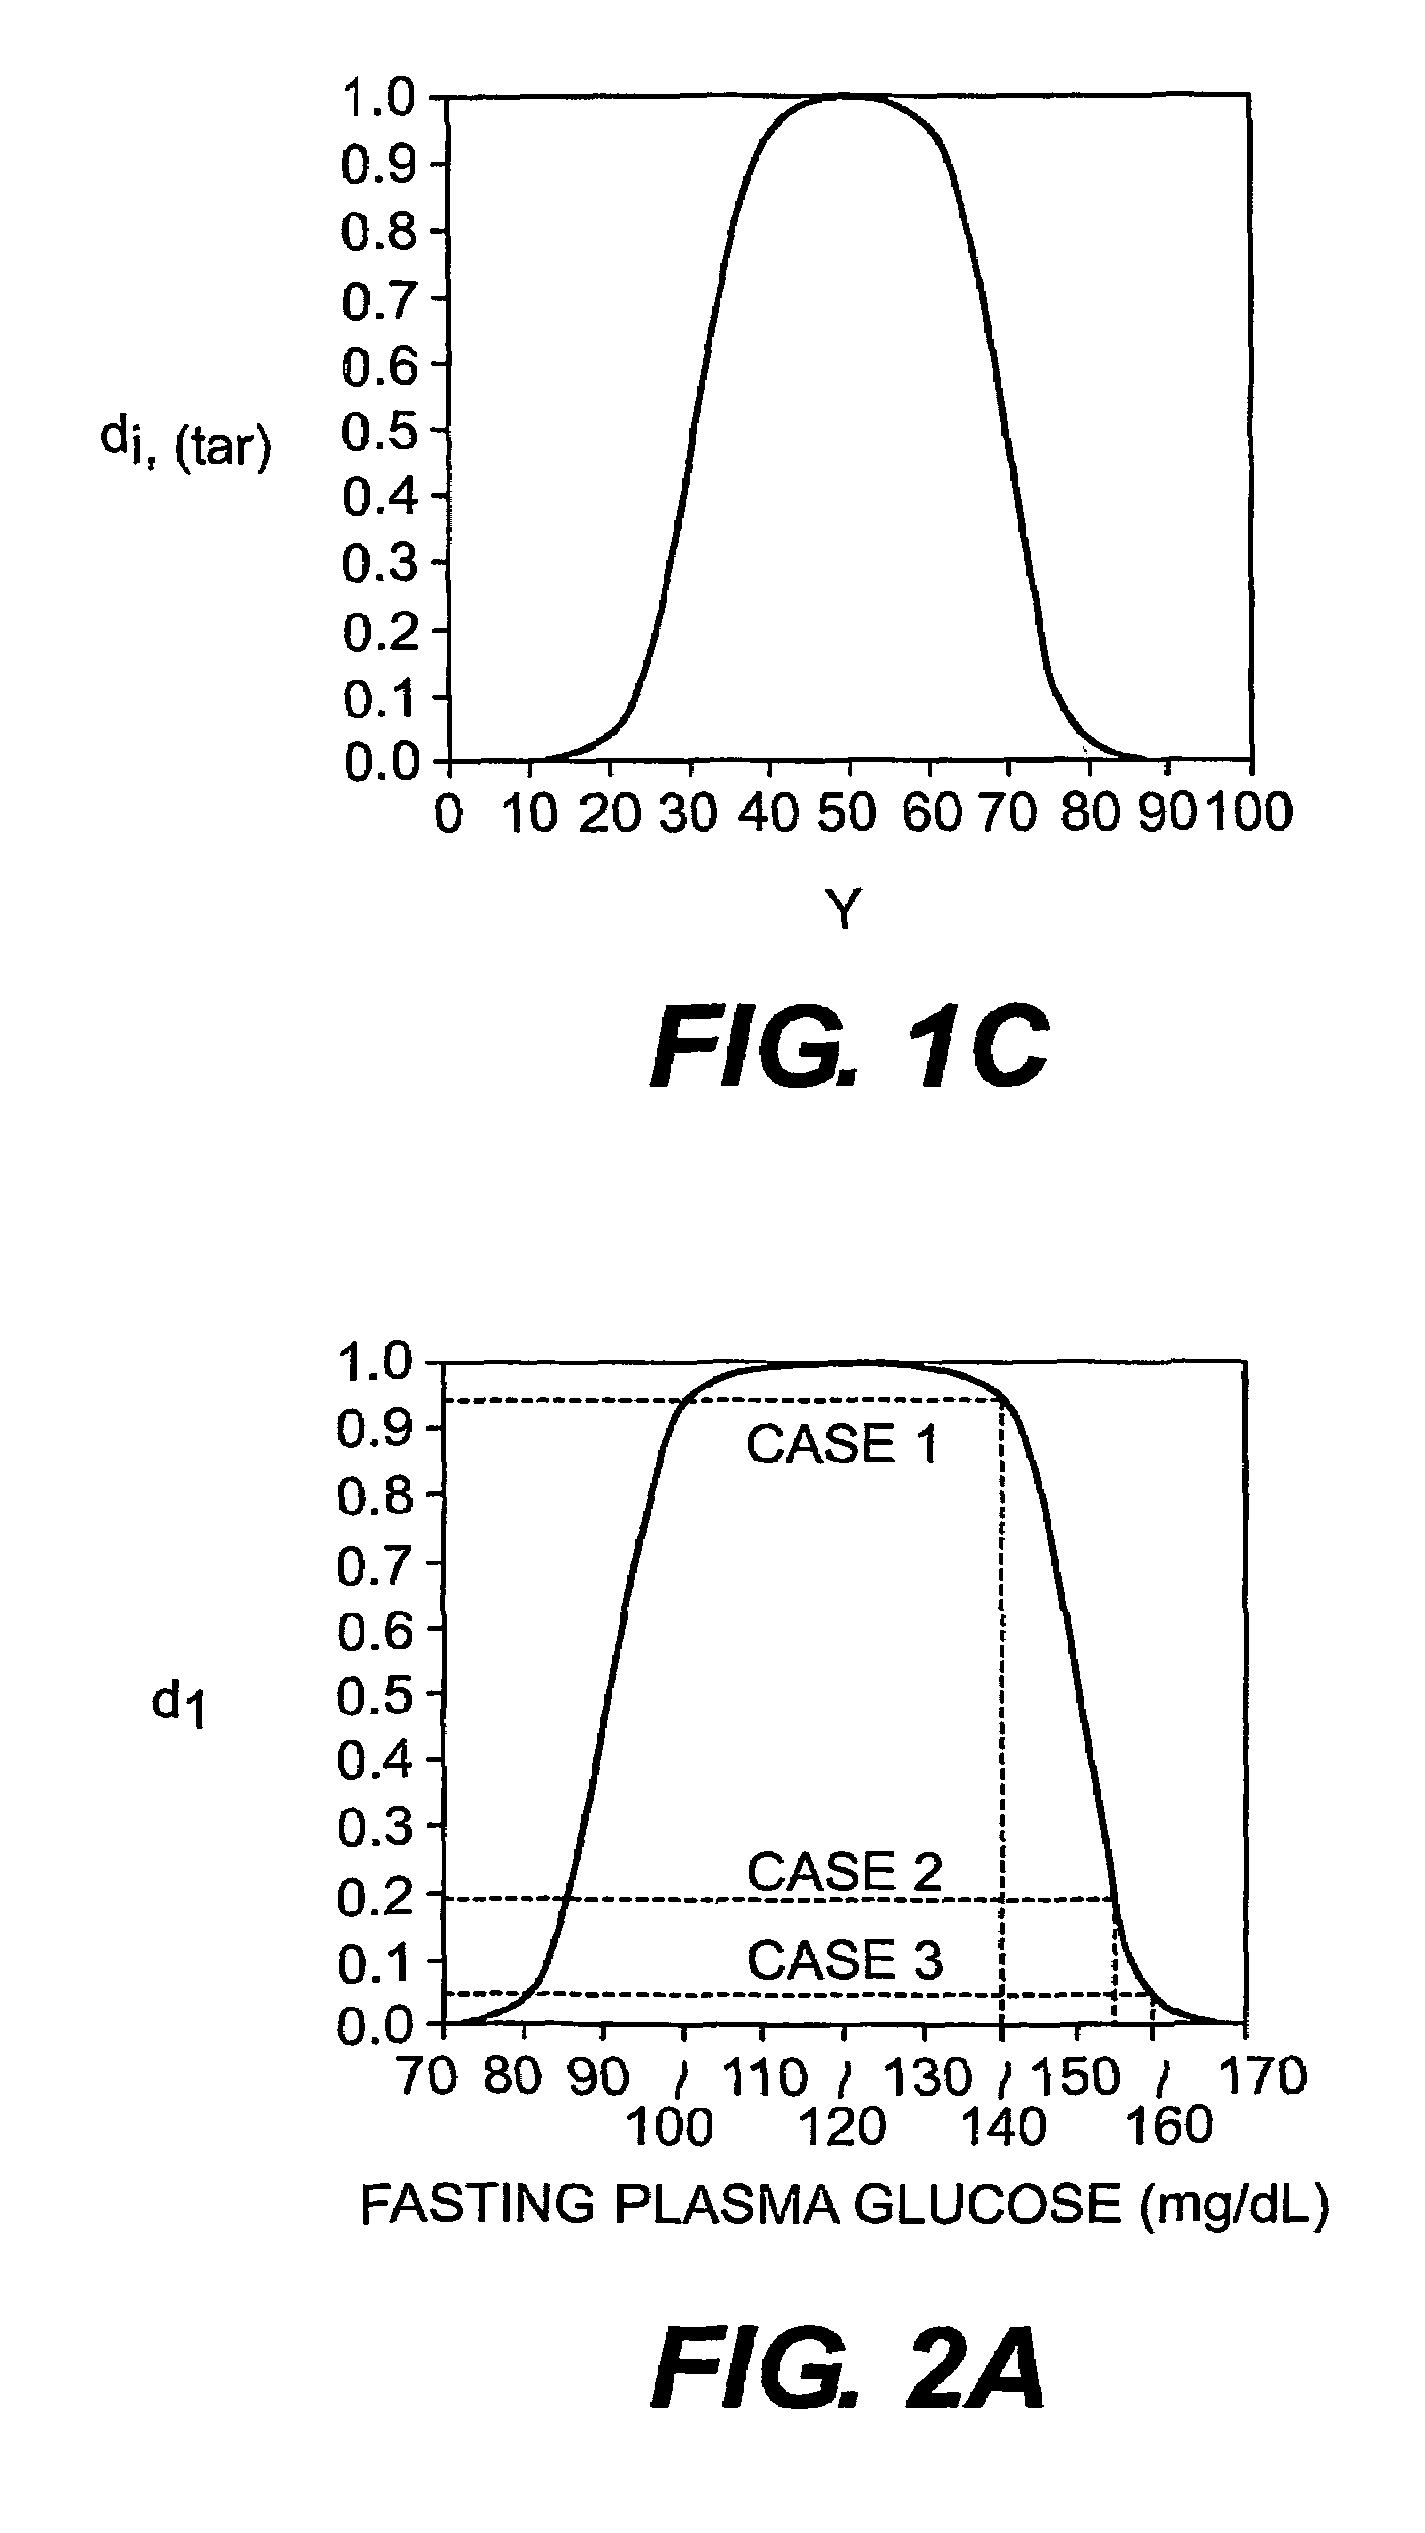 Multi-drug titration and evaluation